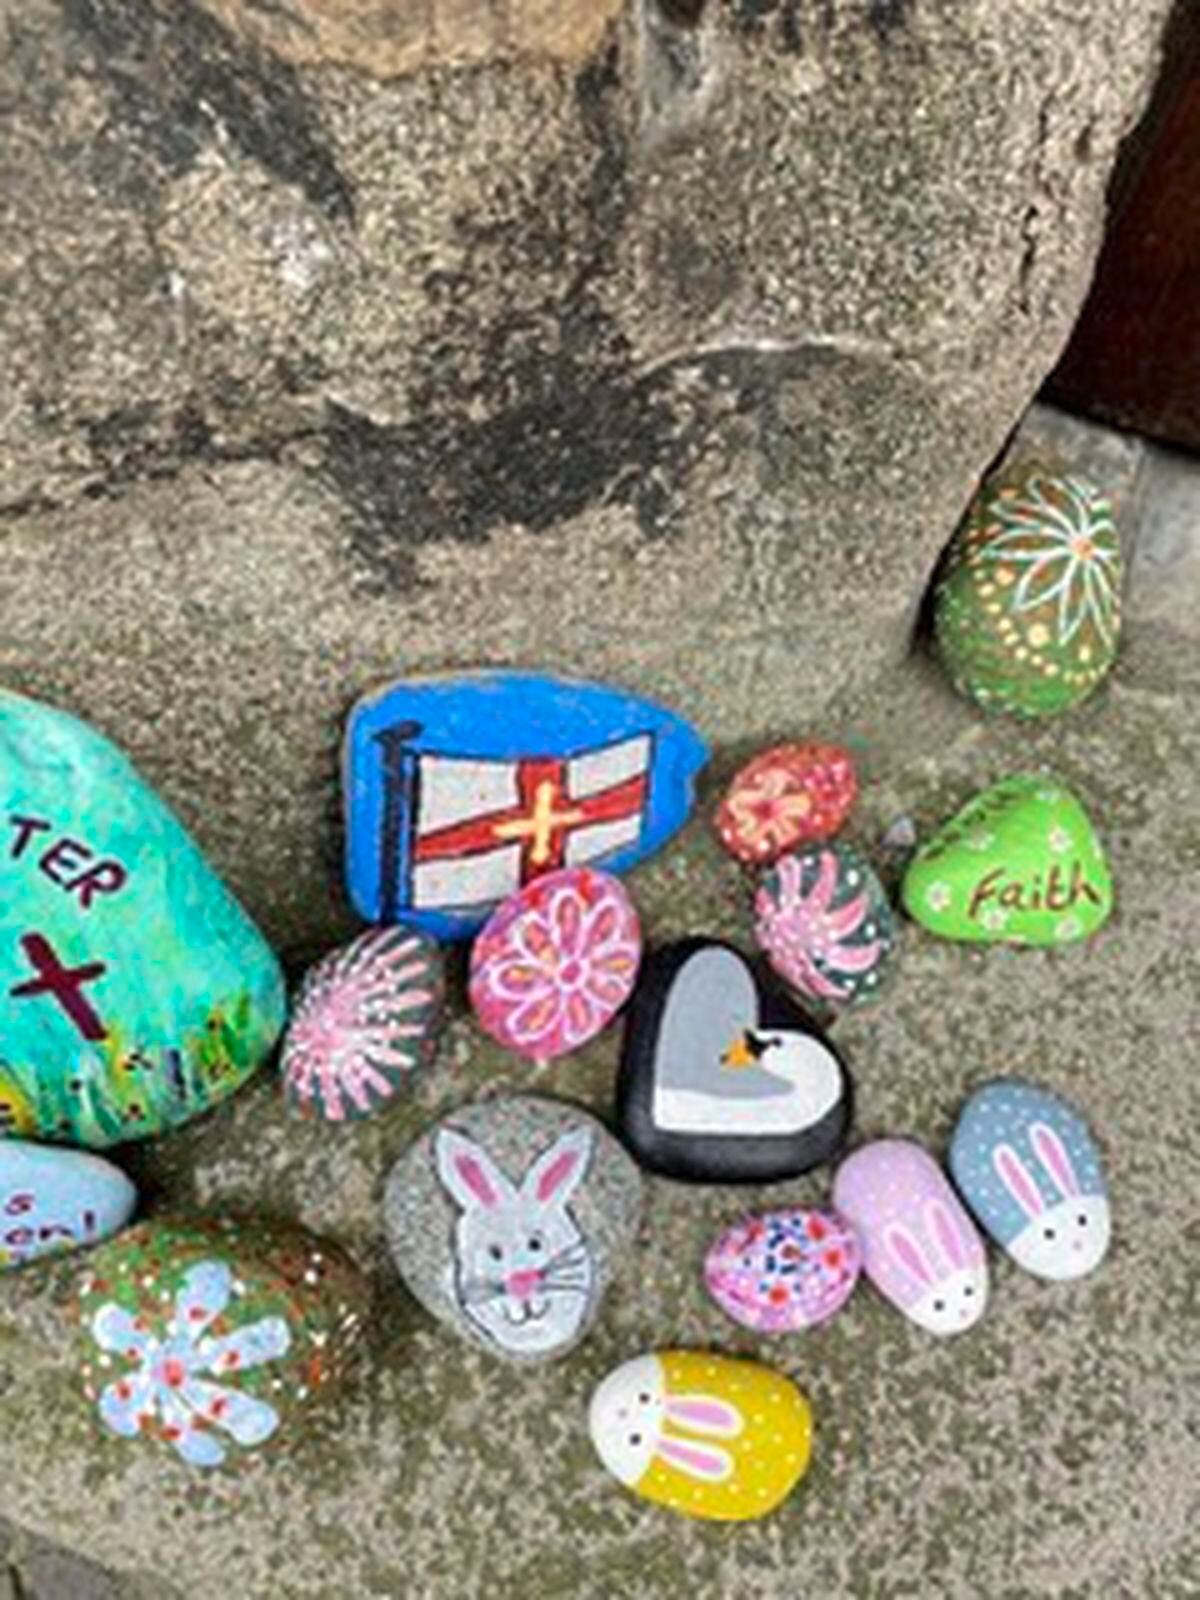 Painted pebbles from the Town Church community art gallery. Image supplied by Ruth Abernethy. (28254832)